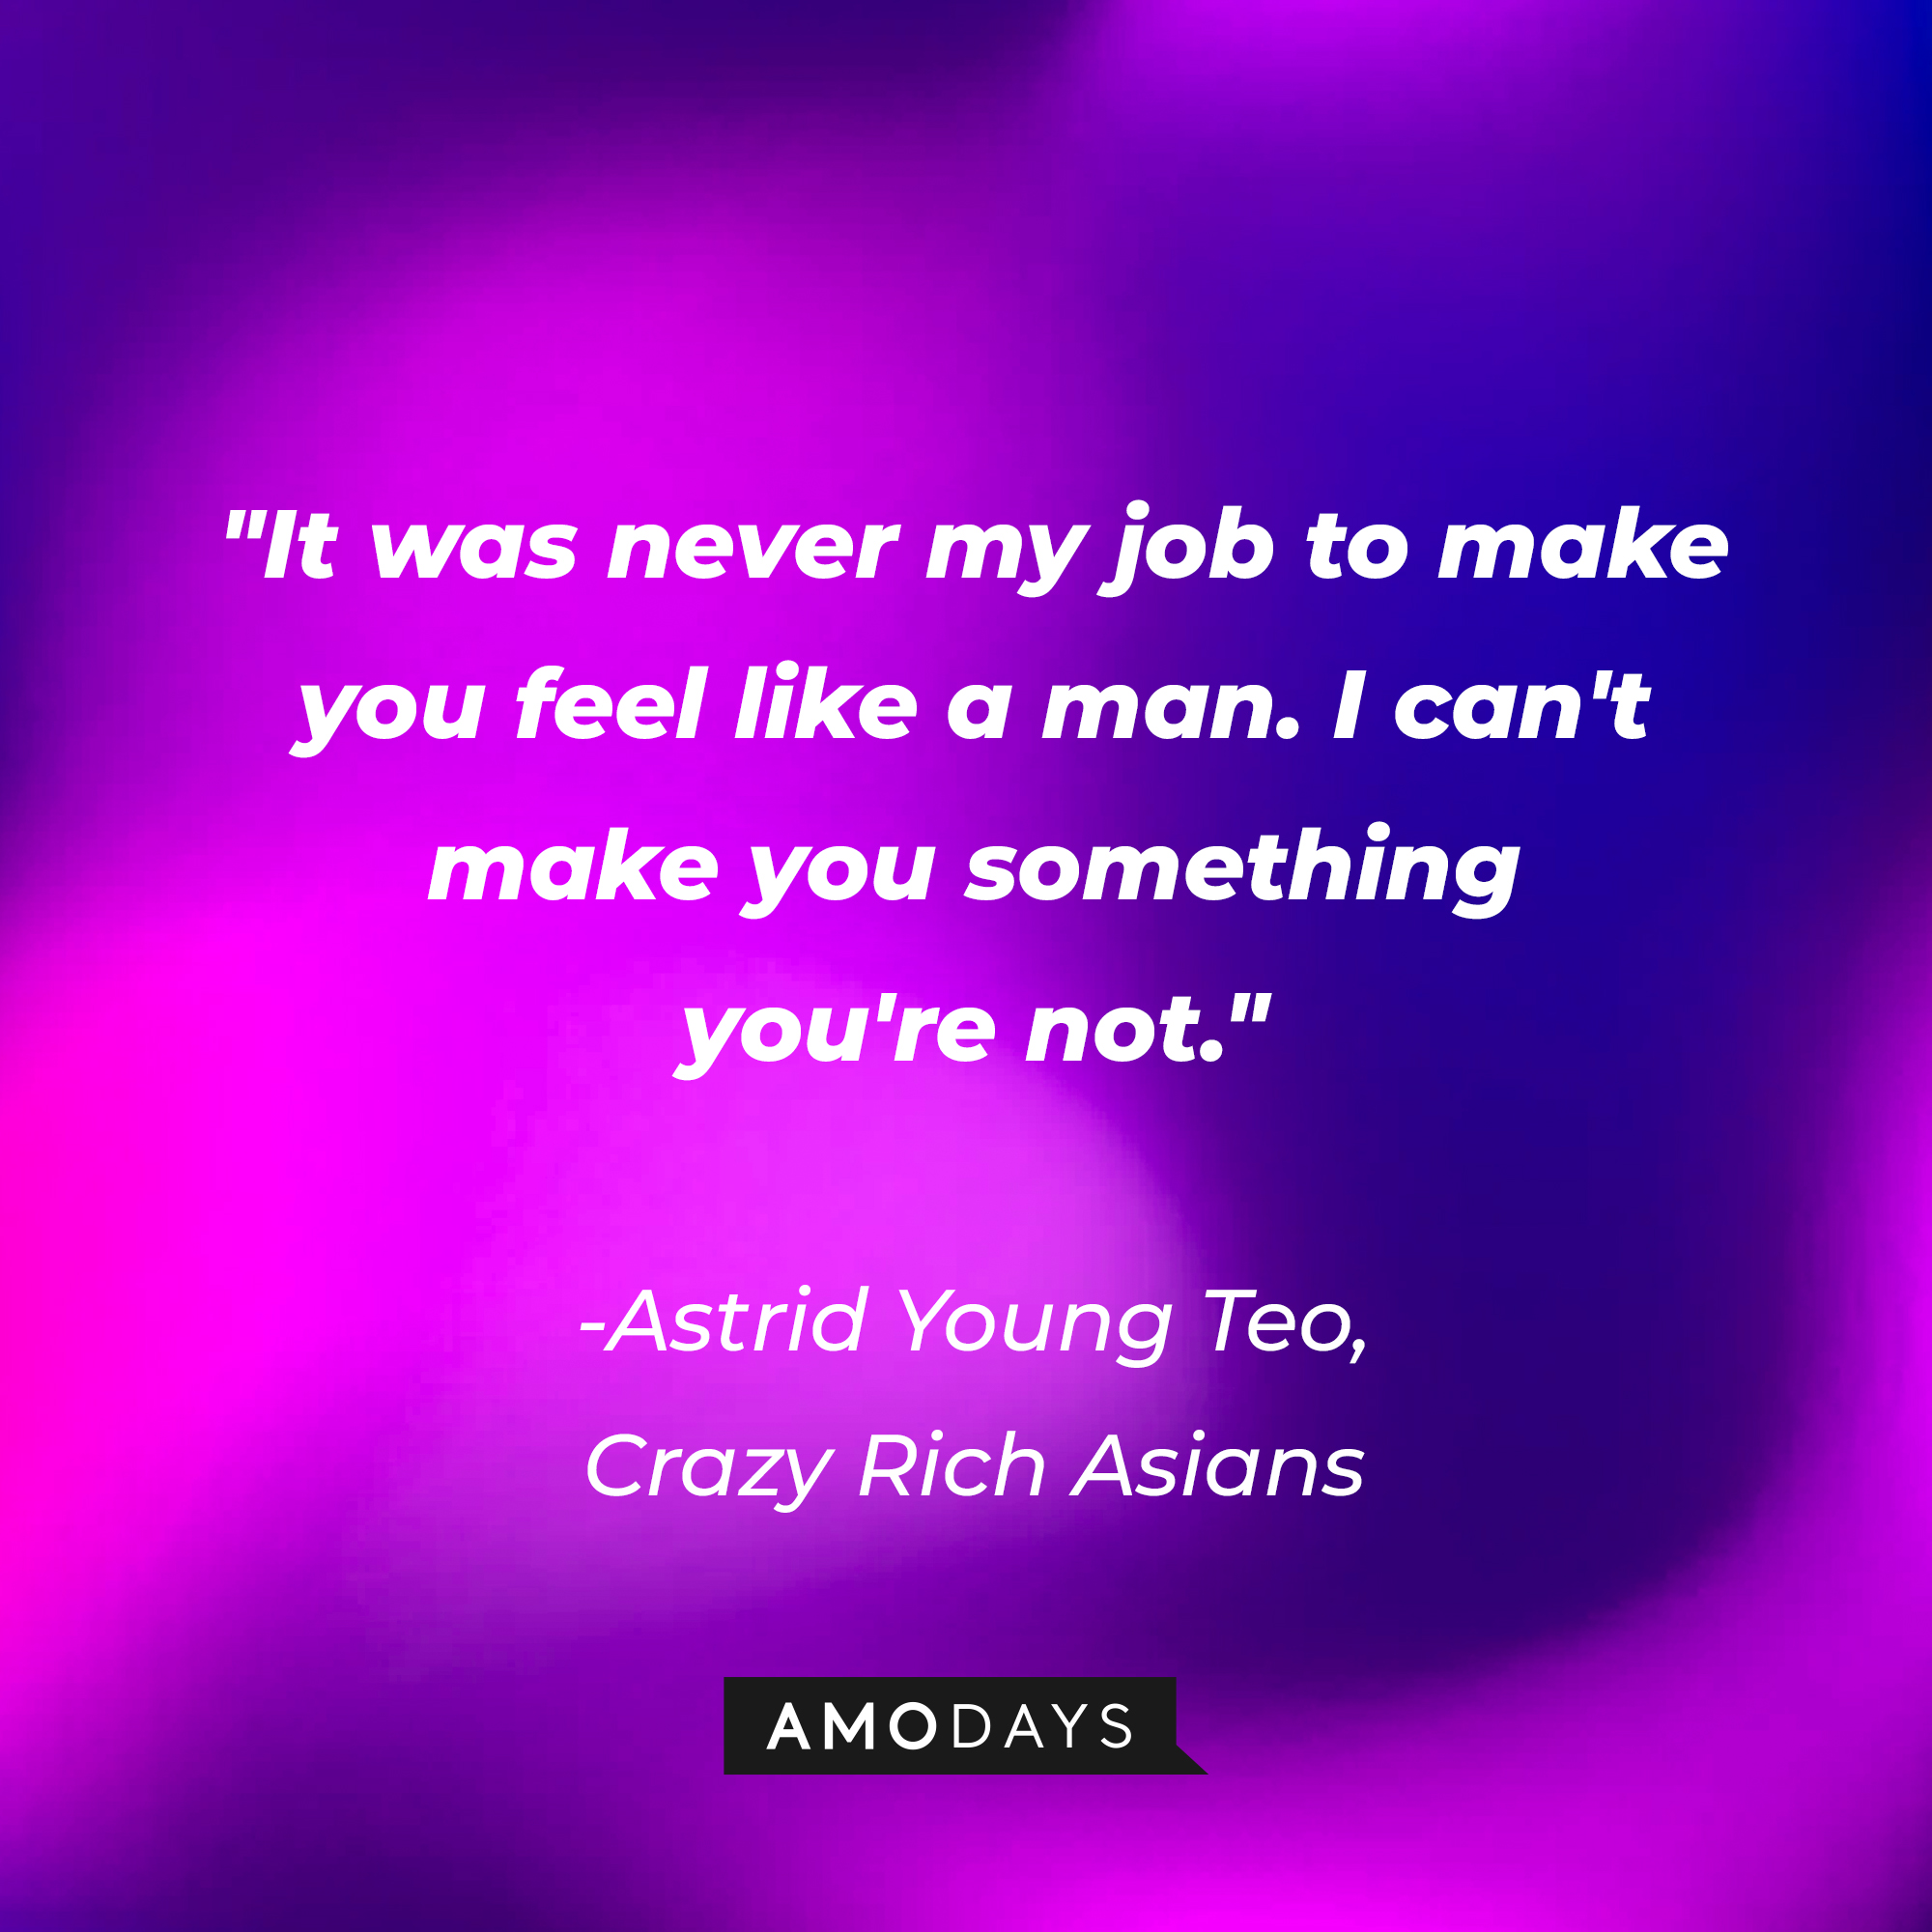 Astrid Young Teo's quote: "It was never my job to make you feel like a man. I can't make you something you're not." | Source: AmoDays